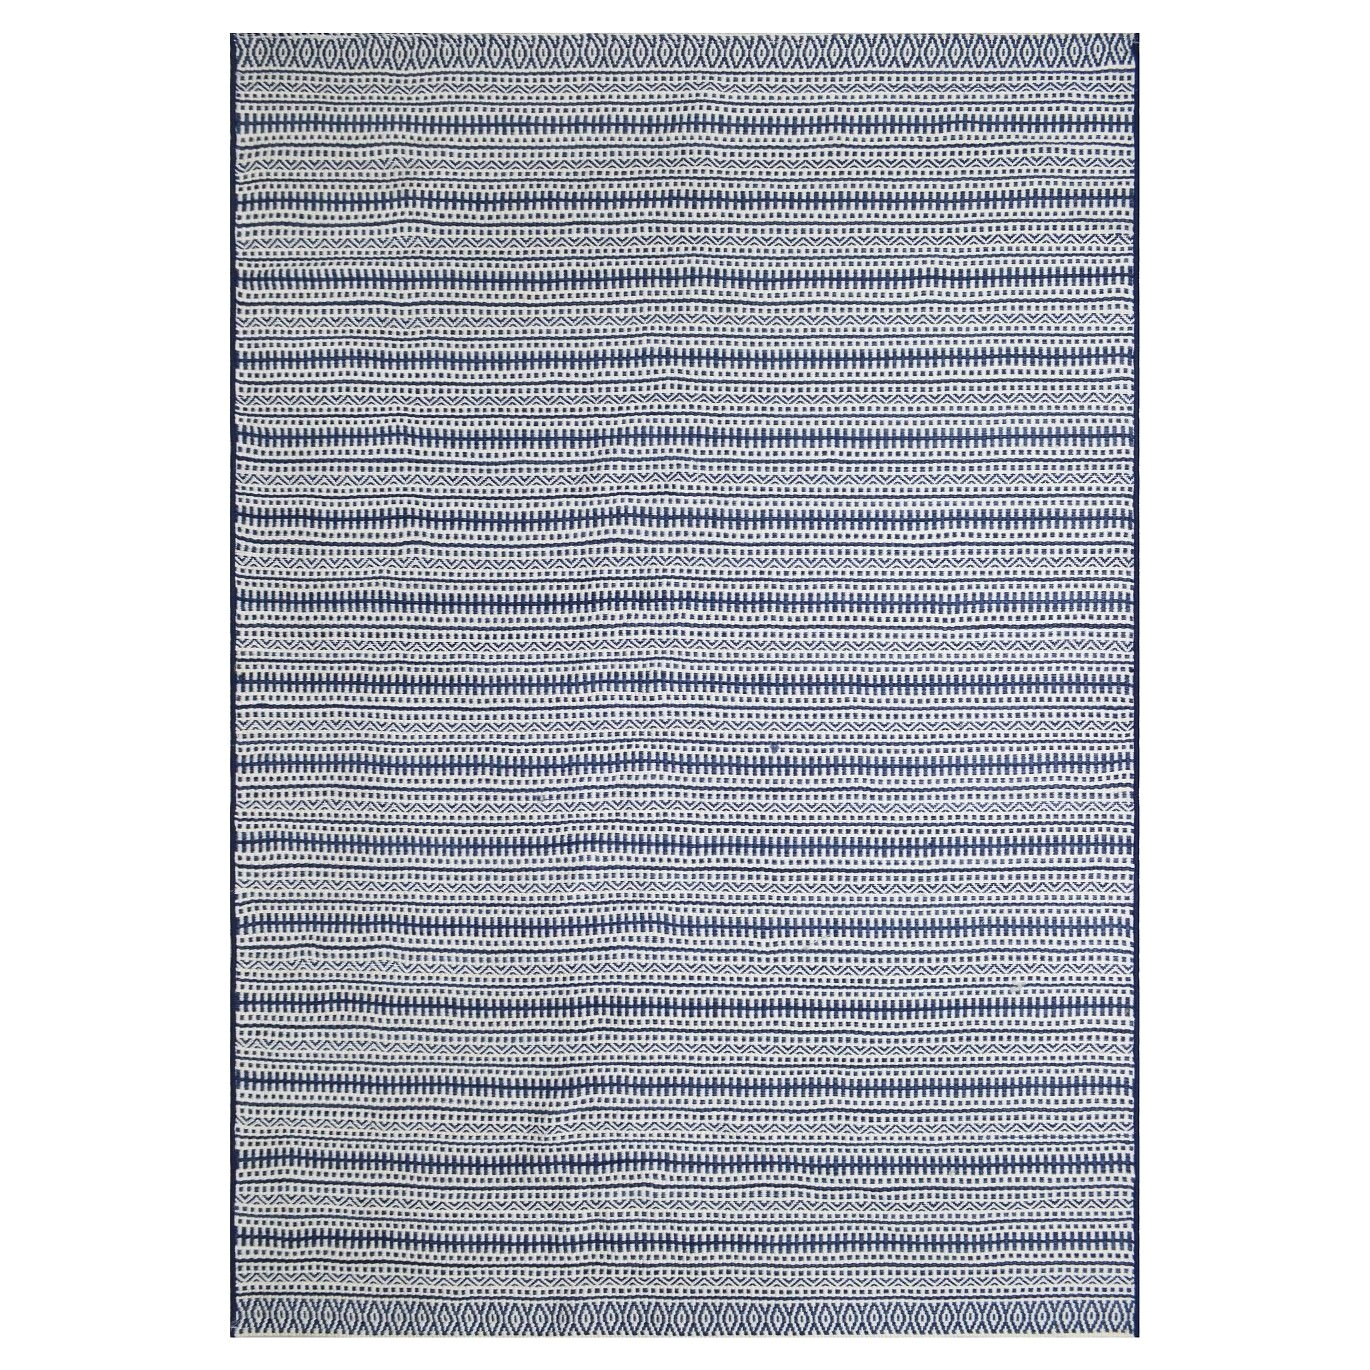 make your outdoor living space feel as comfortable as indoors with the outdoor rug in pattern